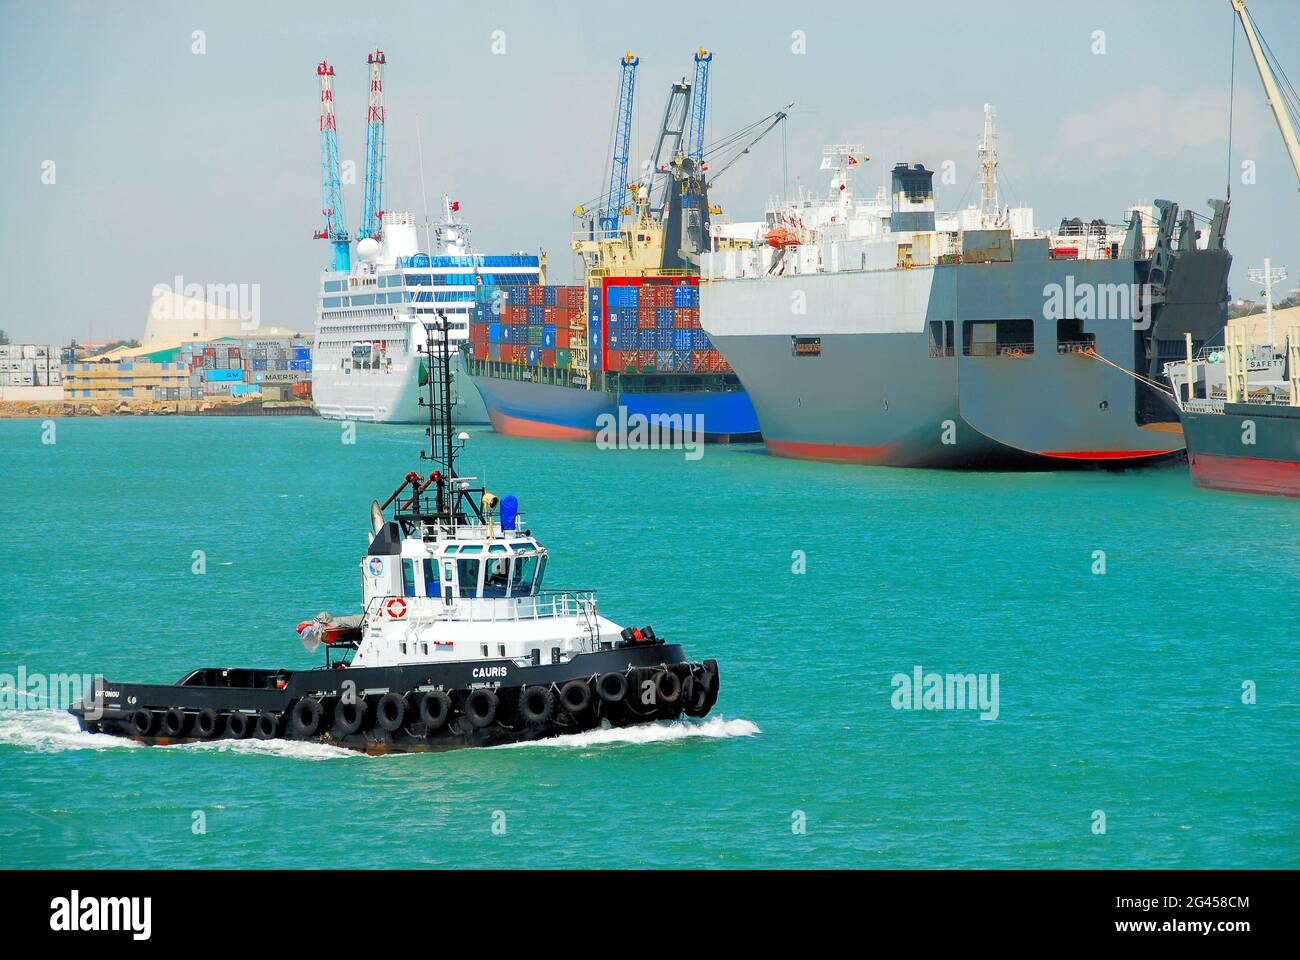 A diversity of ships docked in the turquoise waters at the Autonomous Port of Cotonou, Benin, West Africa while a tug boat travels in the foreground. Stock Photo